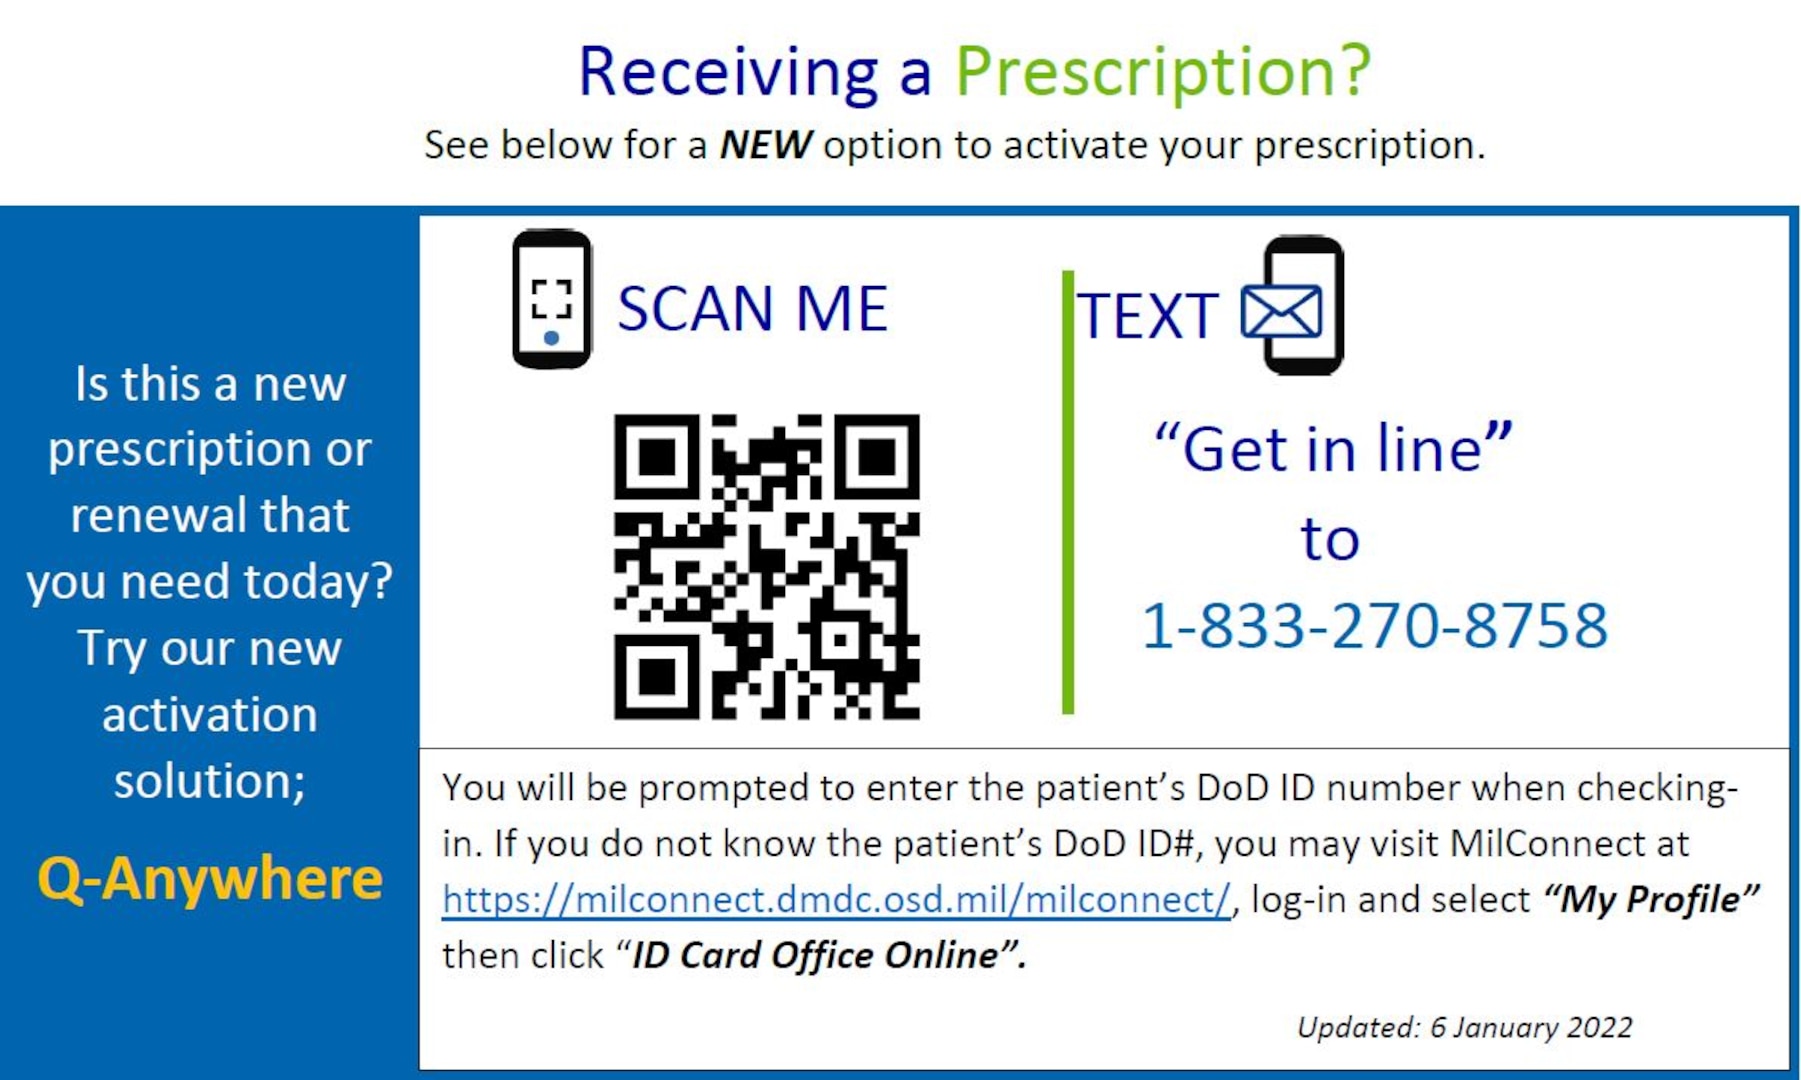 Q-ANYWHERE Prescription Activation: Q-Anywhere Allows you to skip the line and activate new prescriptions by simply texting “Get in line” to 1-833-270-8758 Mon-Fri, 8:30am – 5pm. READ MORE